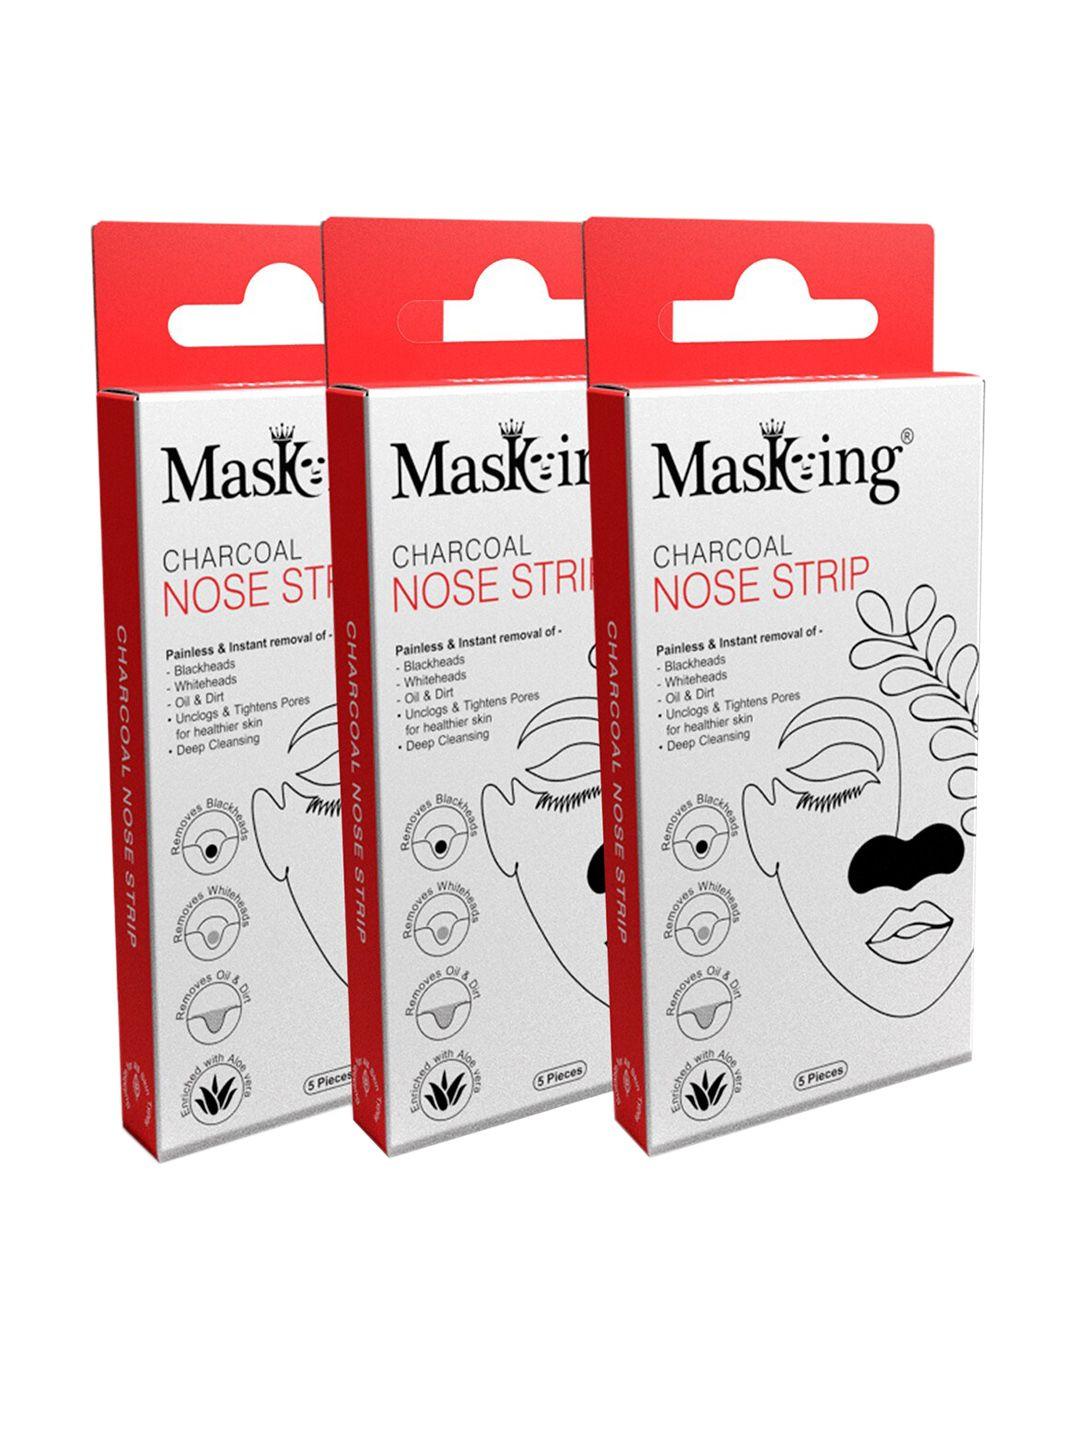 masking charcoal nose stripes for blackheads removal